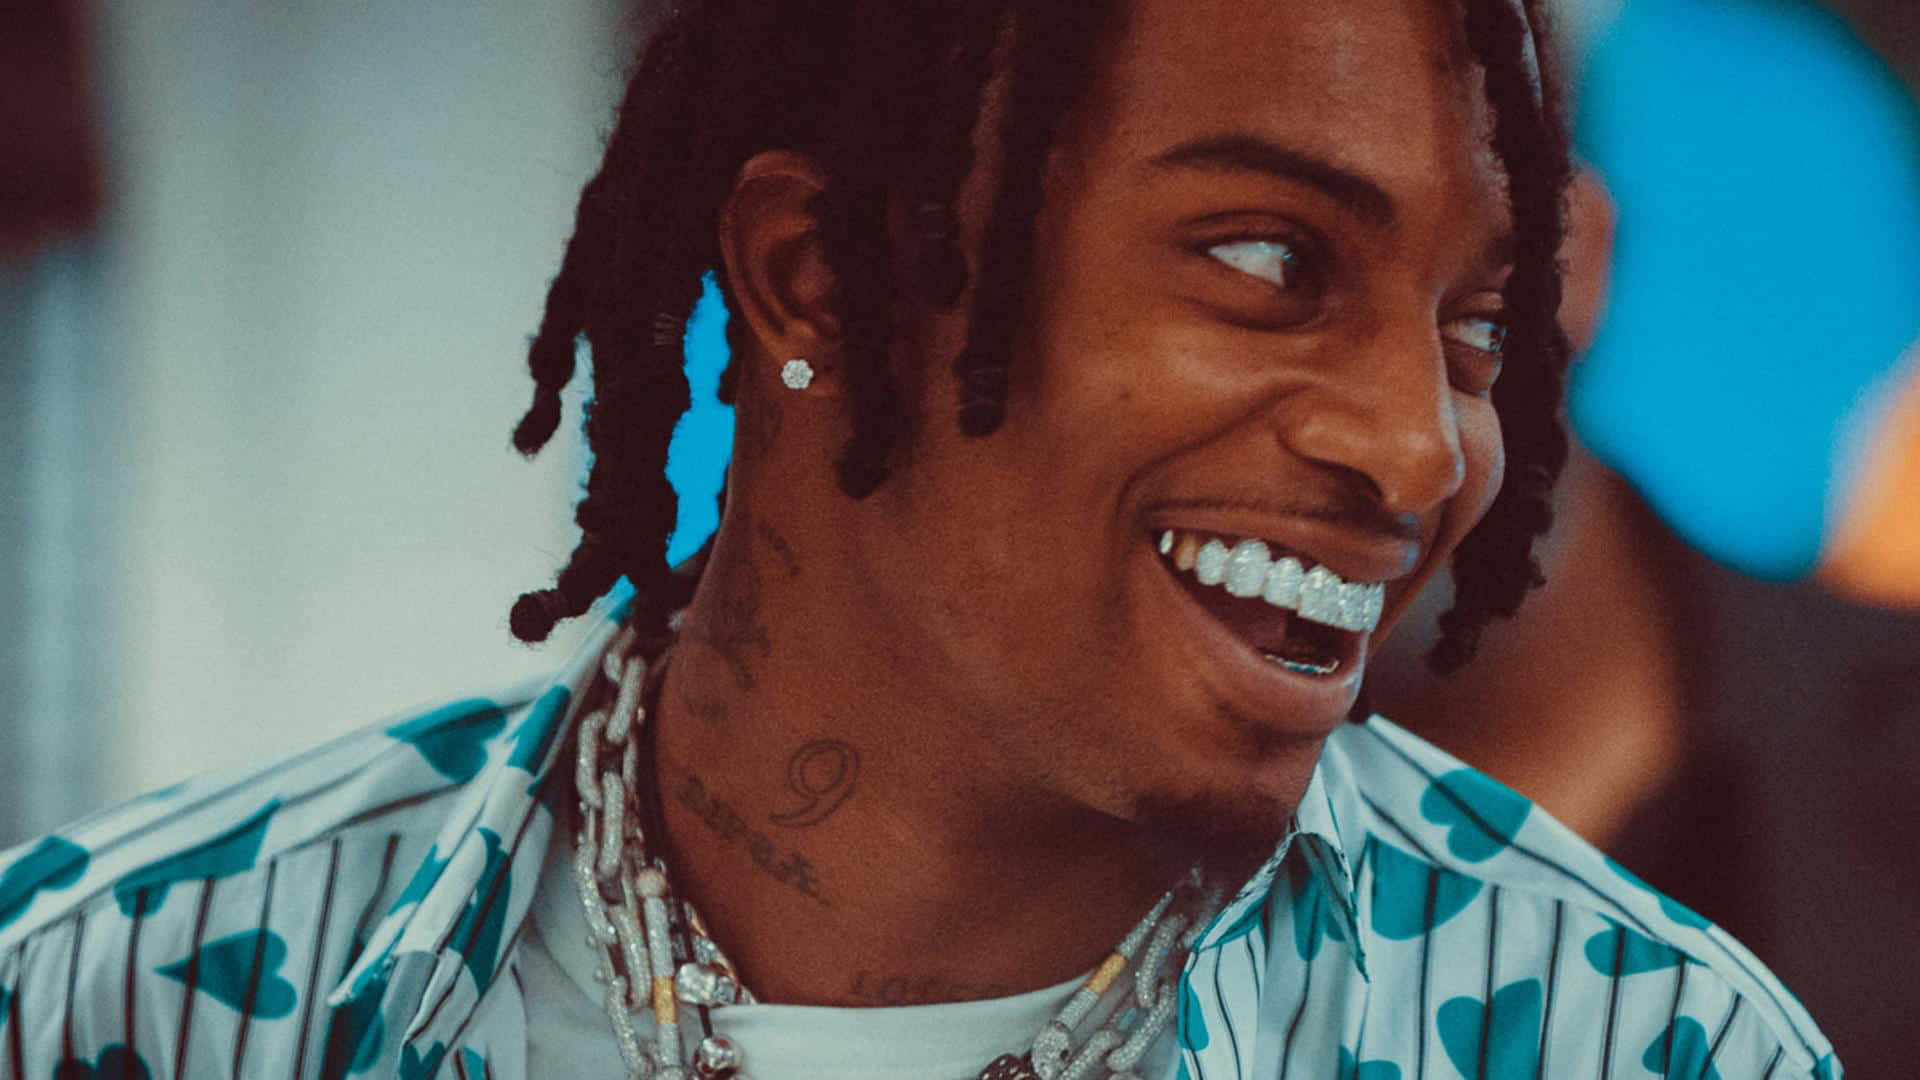 Smiling Rapperwith Dreadlocksand Grillz Wallpaper